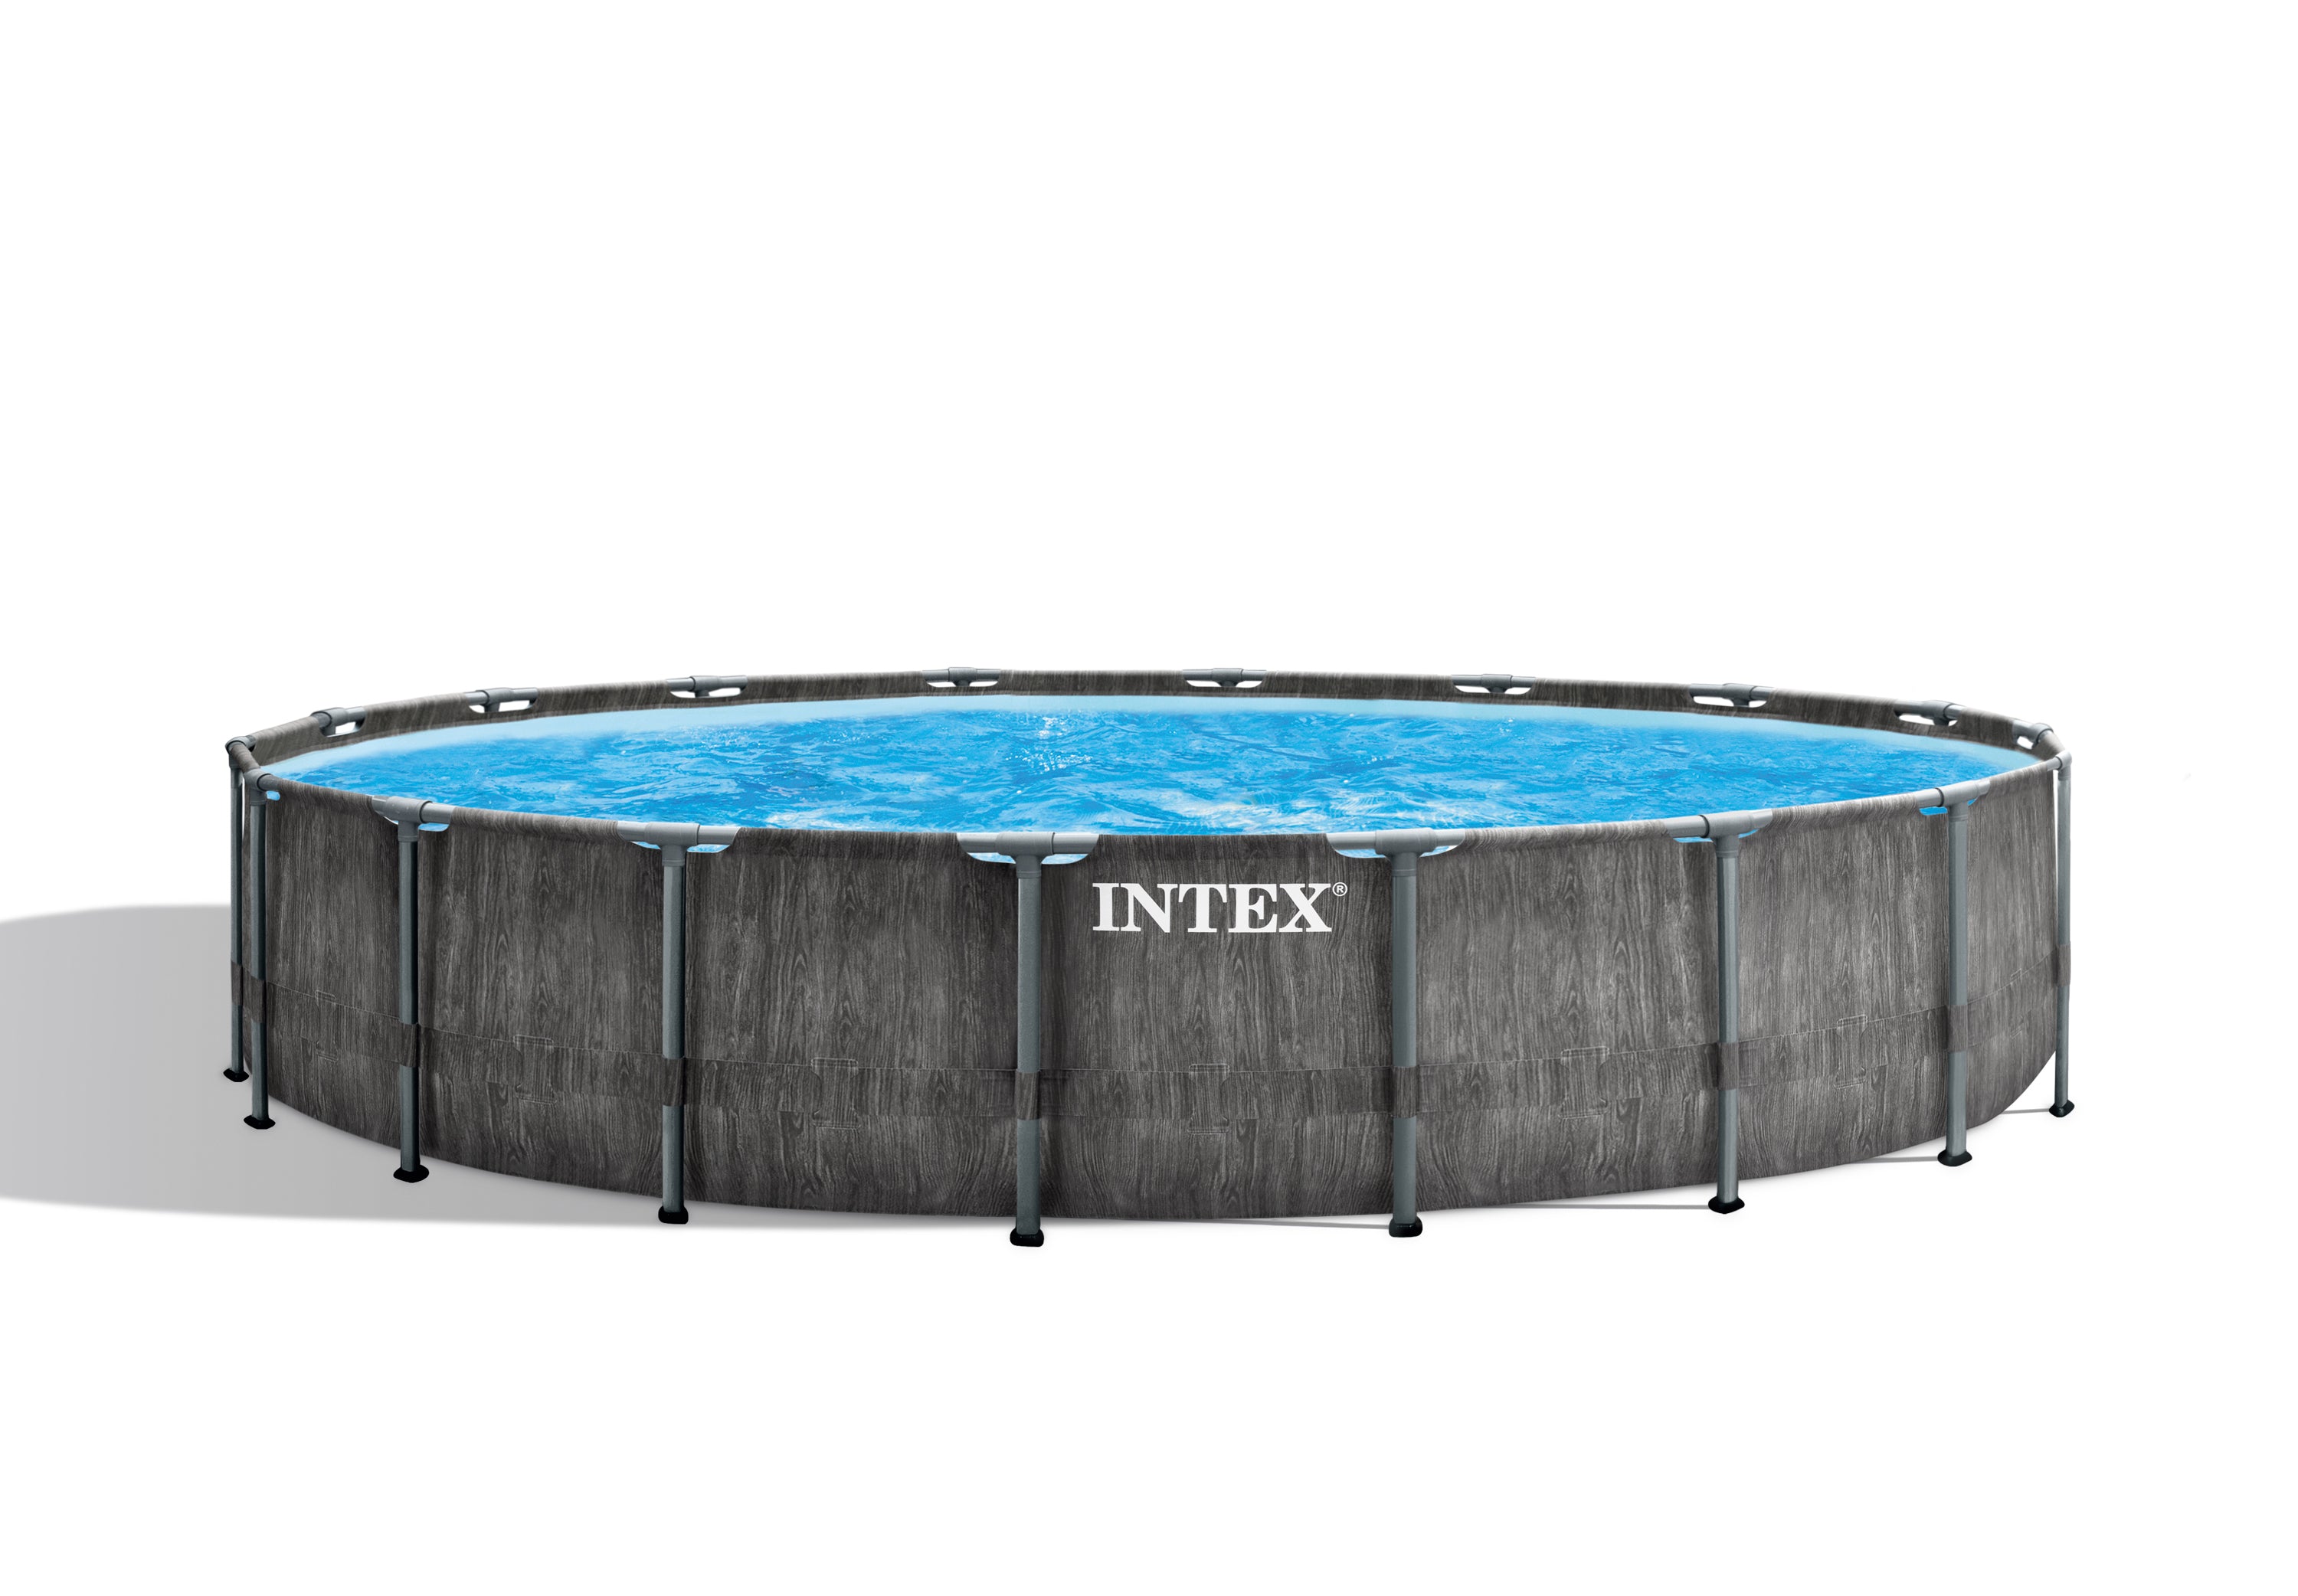 Intex 18ft x 48in Greywood Prism Steel Frame Pool Set with Cover, Ladder, Pump